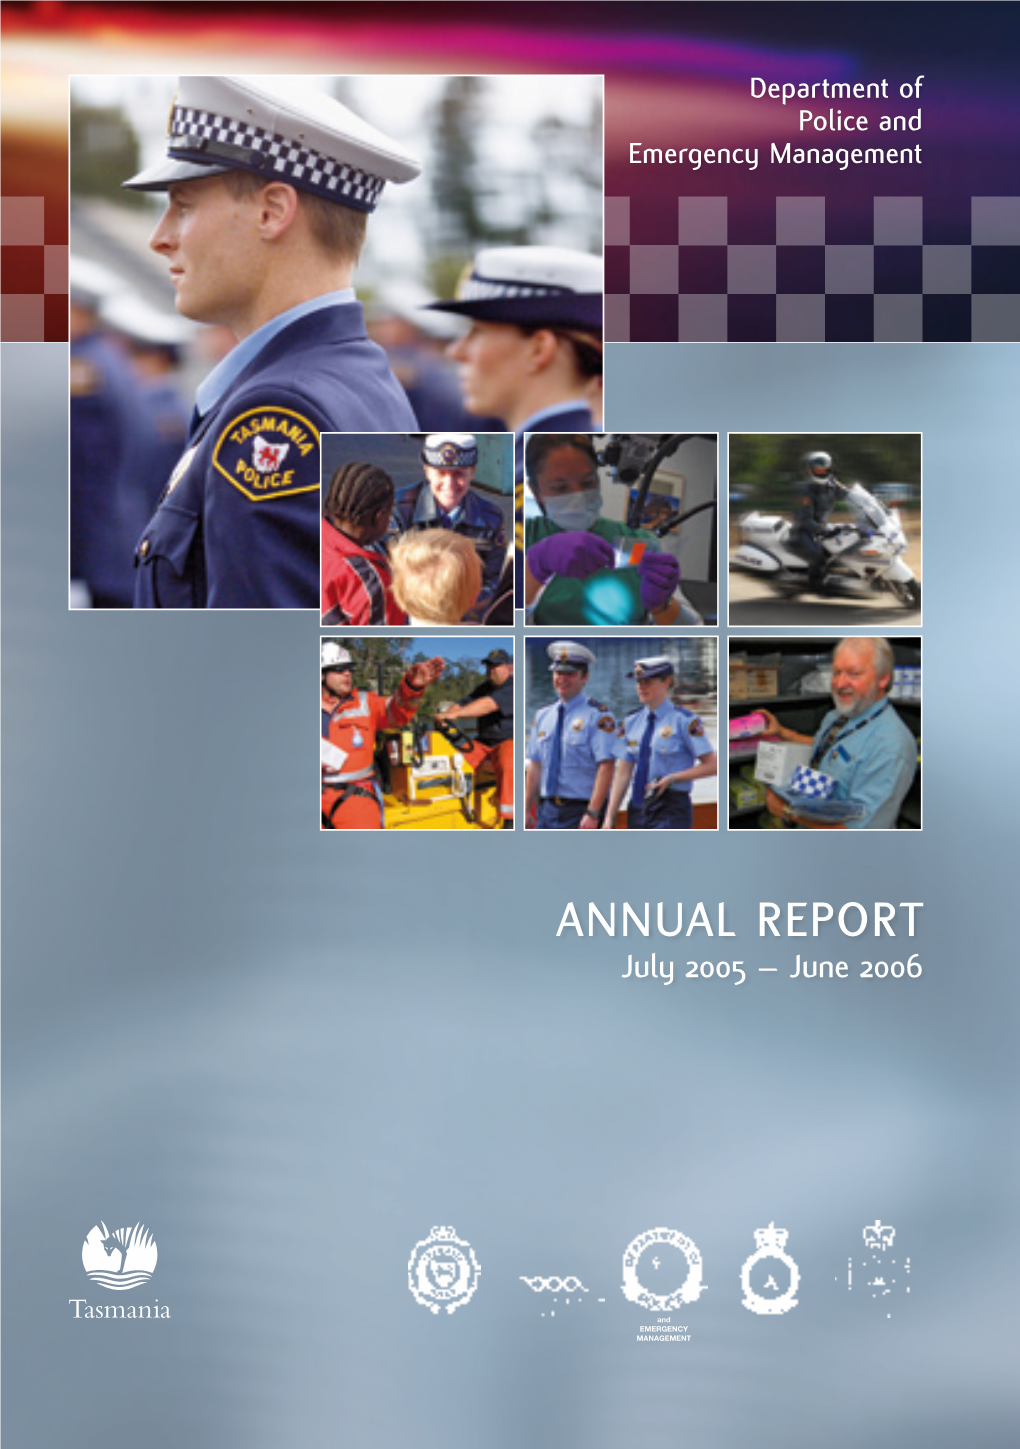 Annual Report Annual Management Emergency and Police of Department